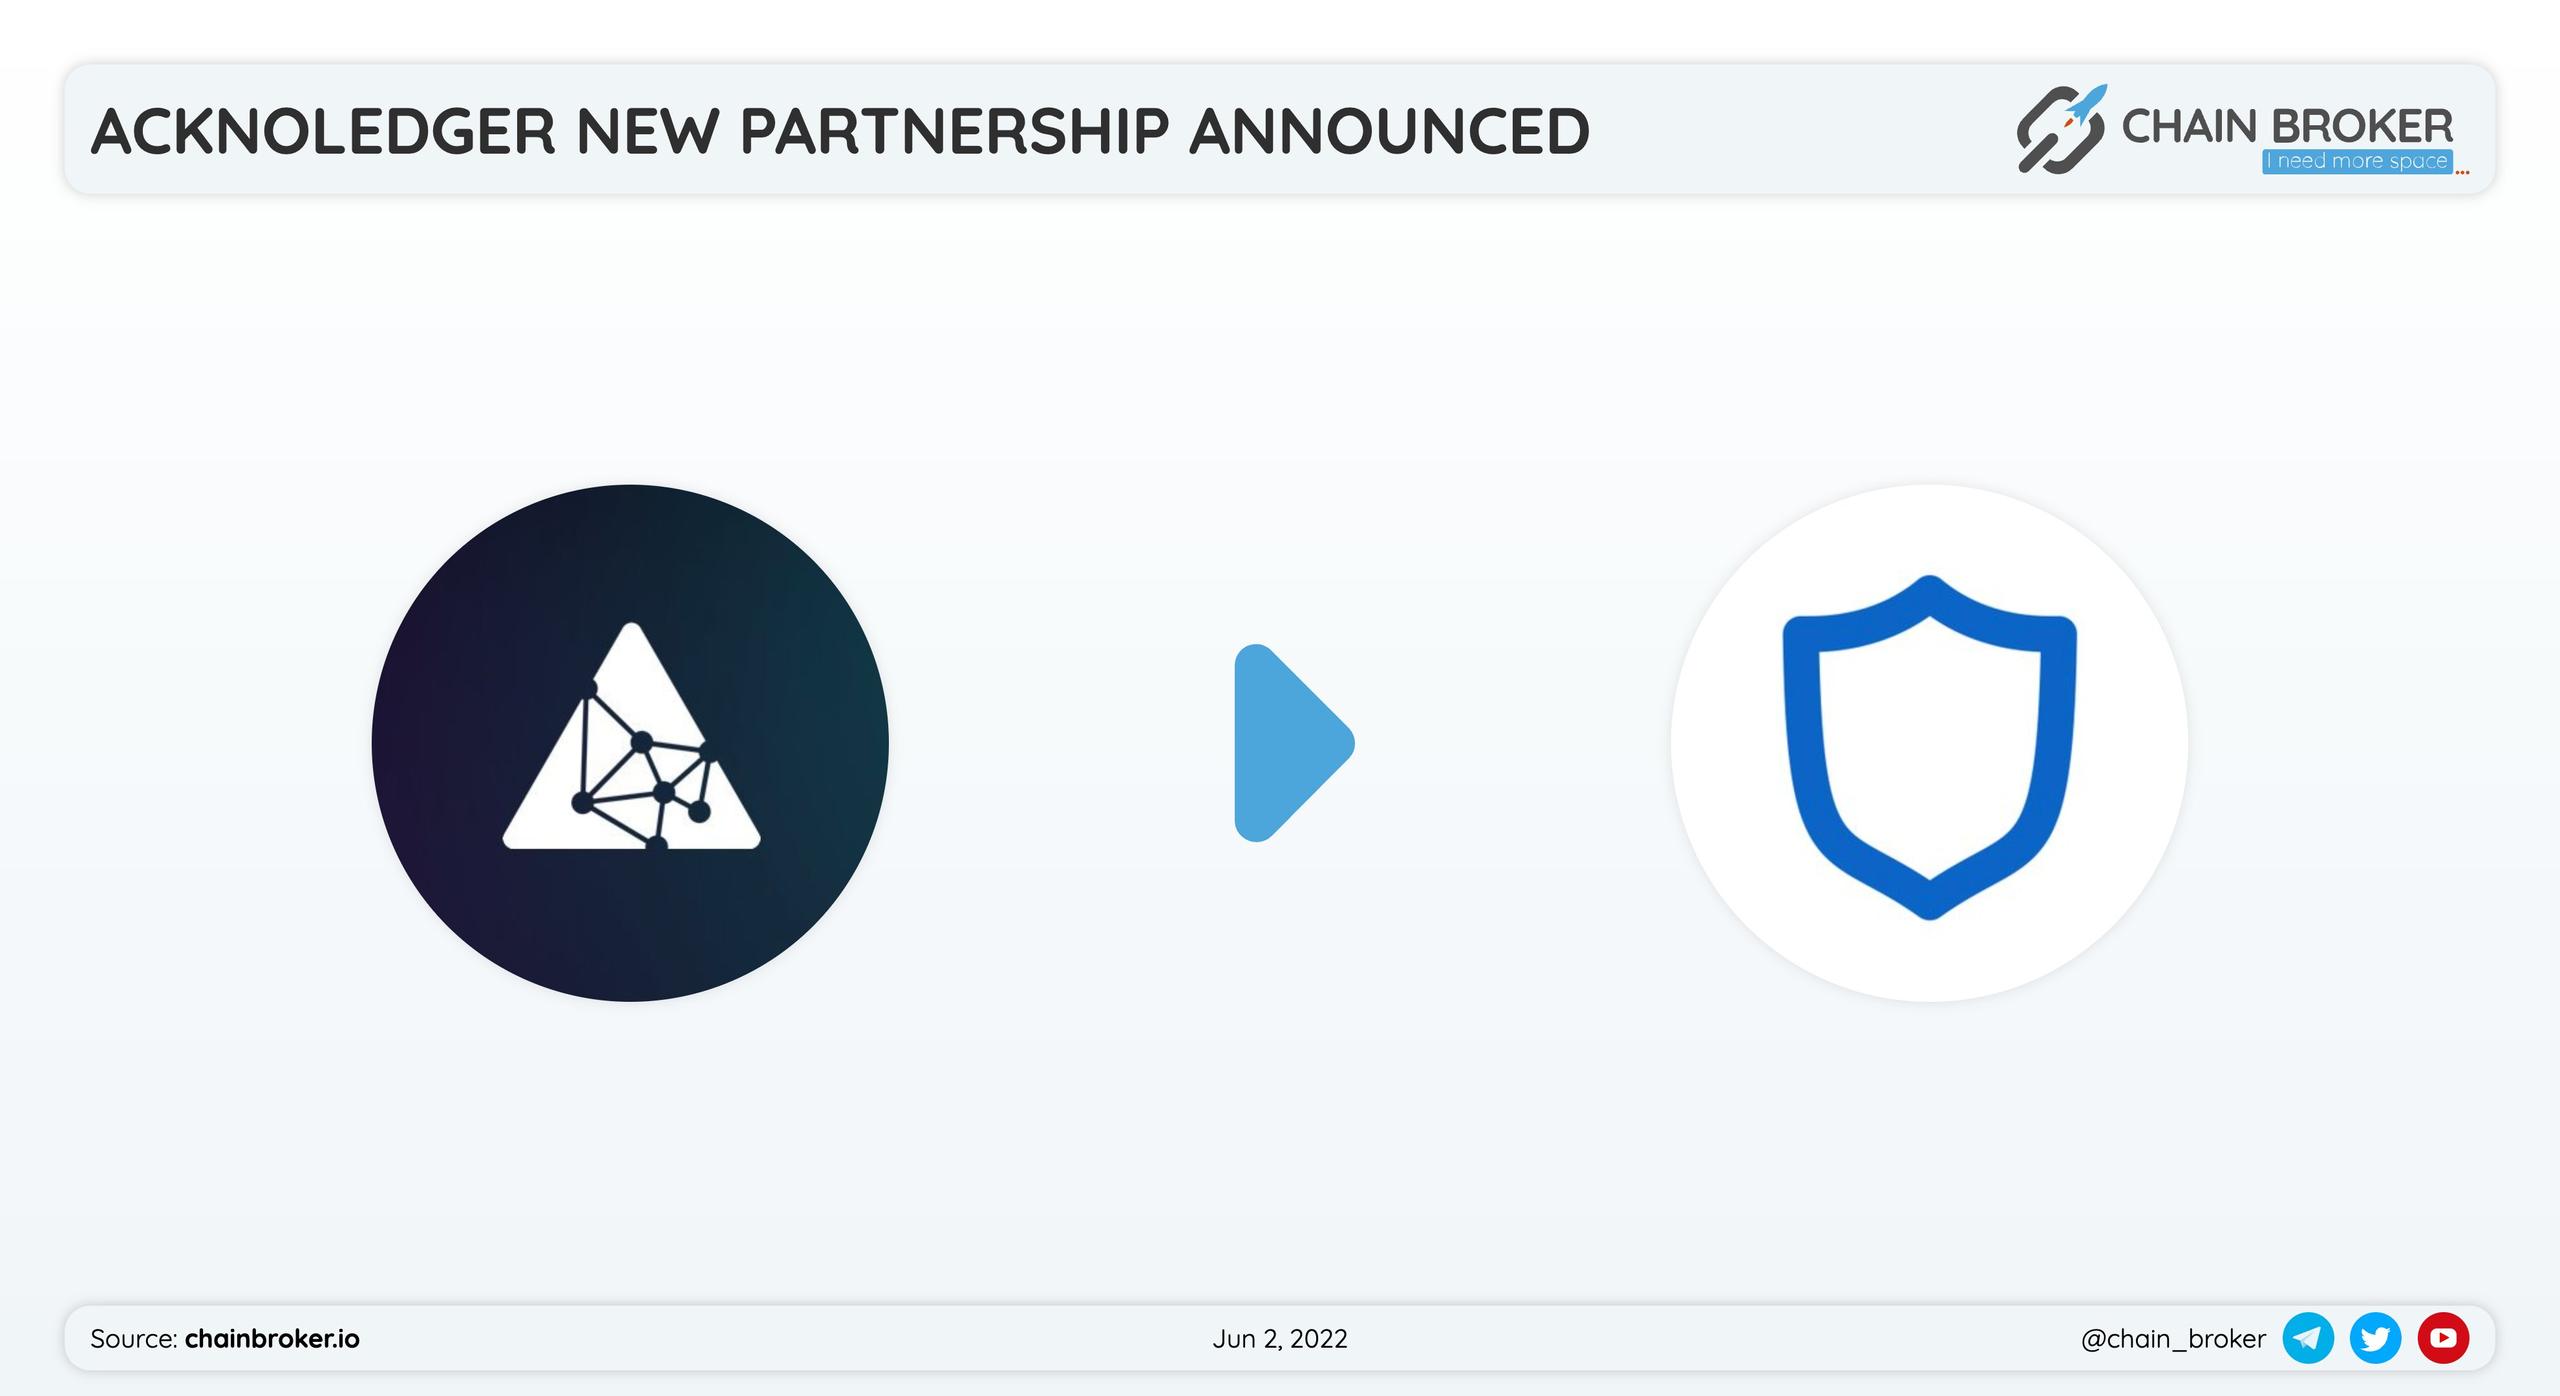 Itheum has partnered with Trust Wallet